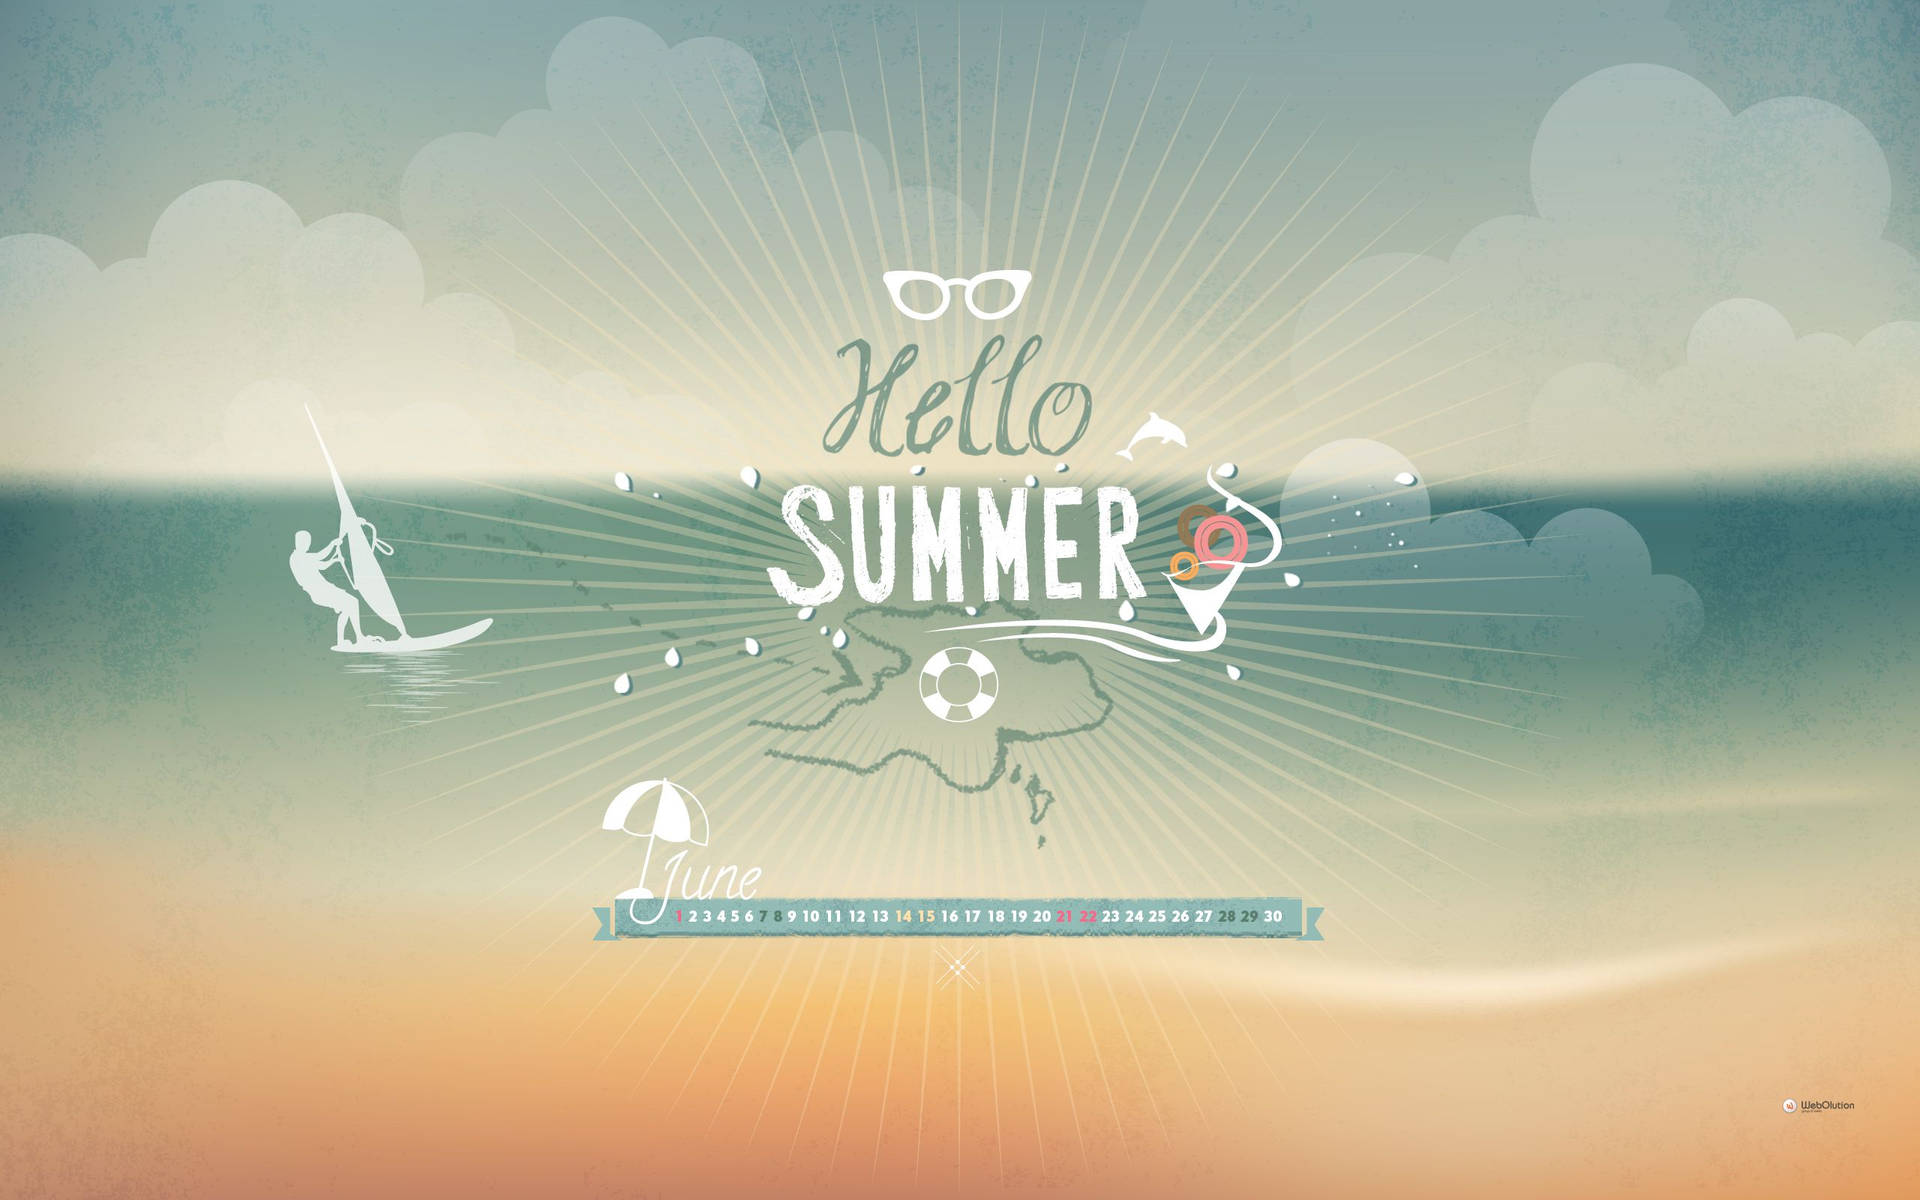 Summer has arrived! Kick off your June right with a fun outdoor activity! Wallpaper